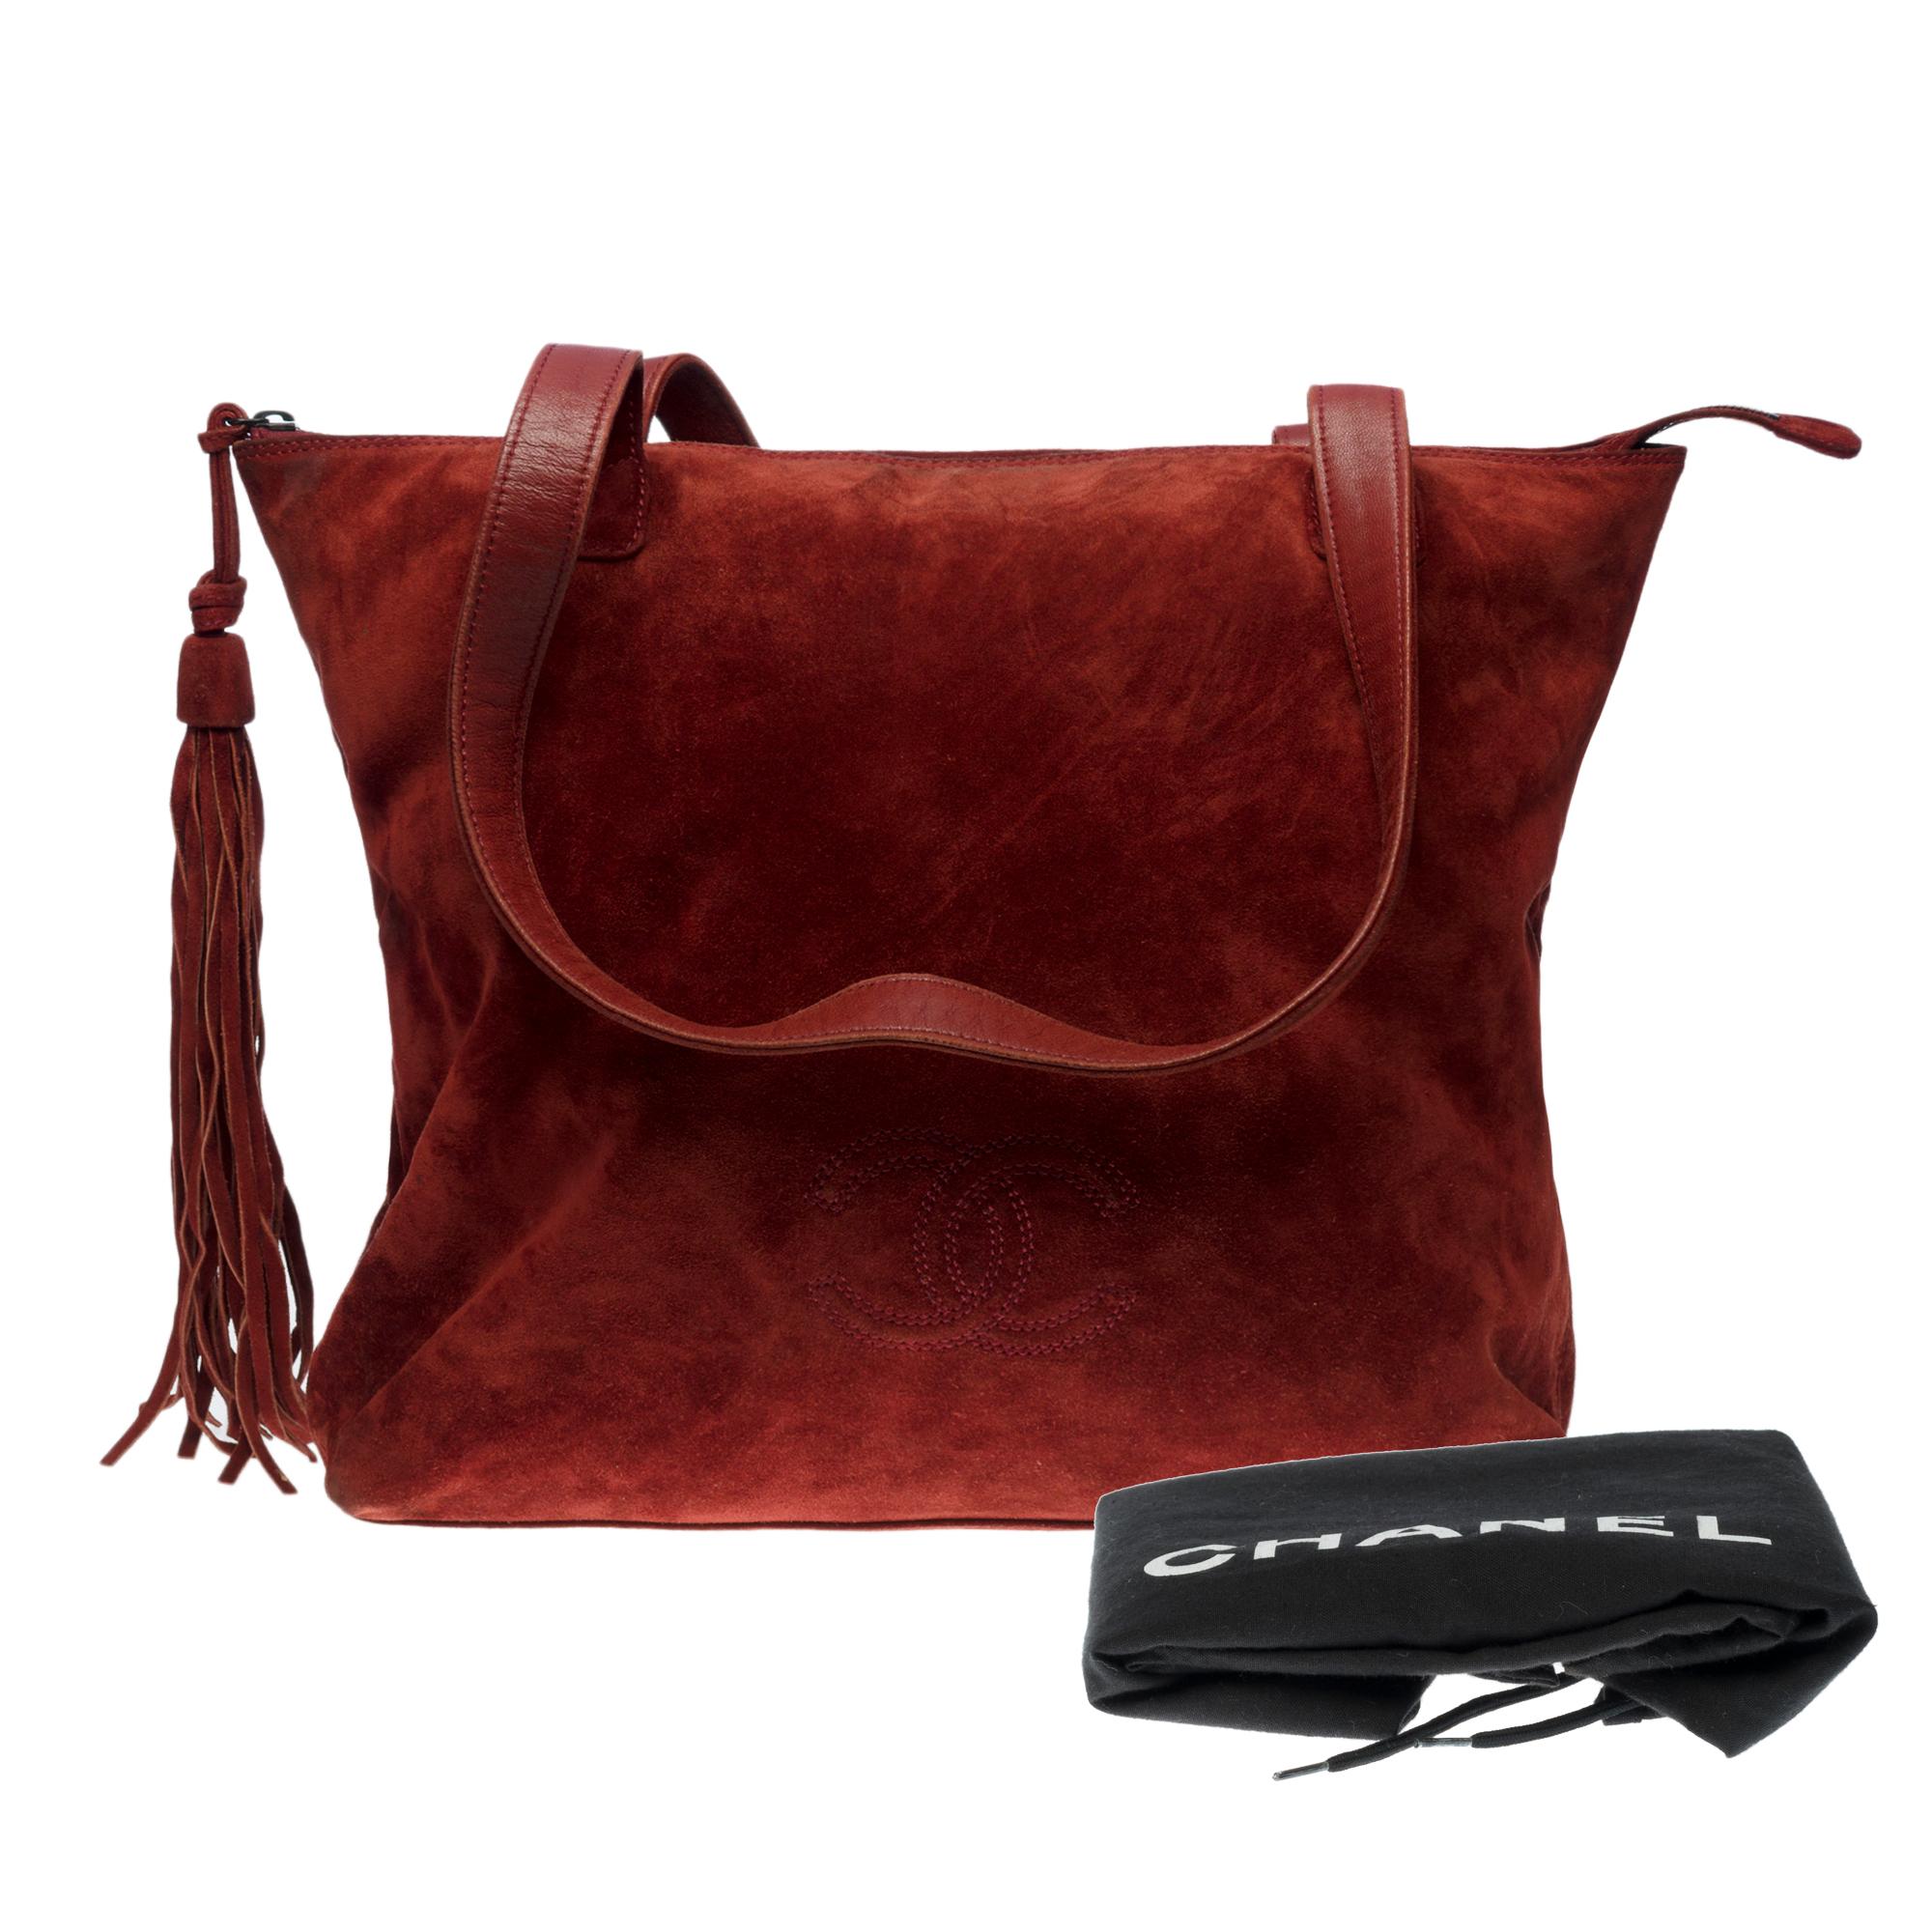 Gorgeous Chanel Tote bag in burgundy suede, SHW 5